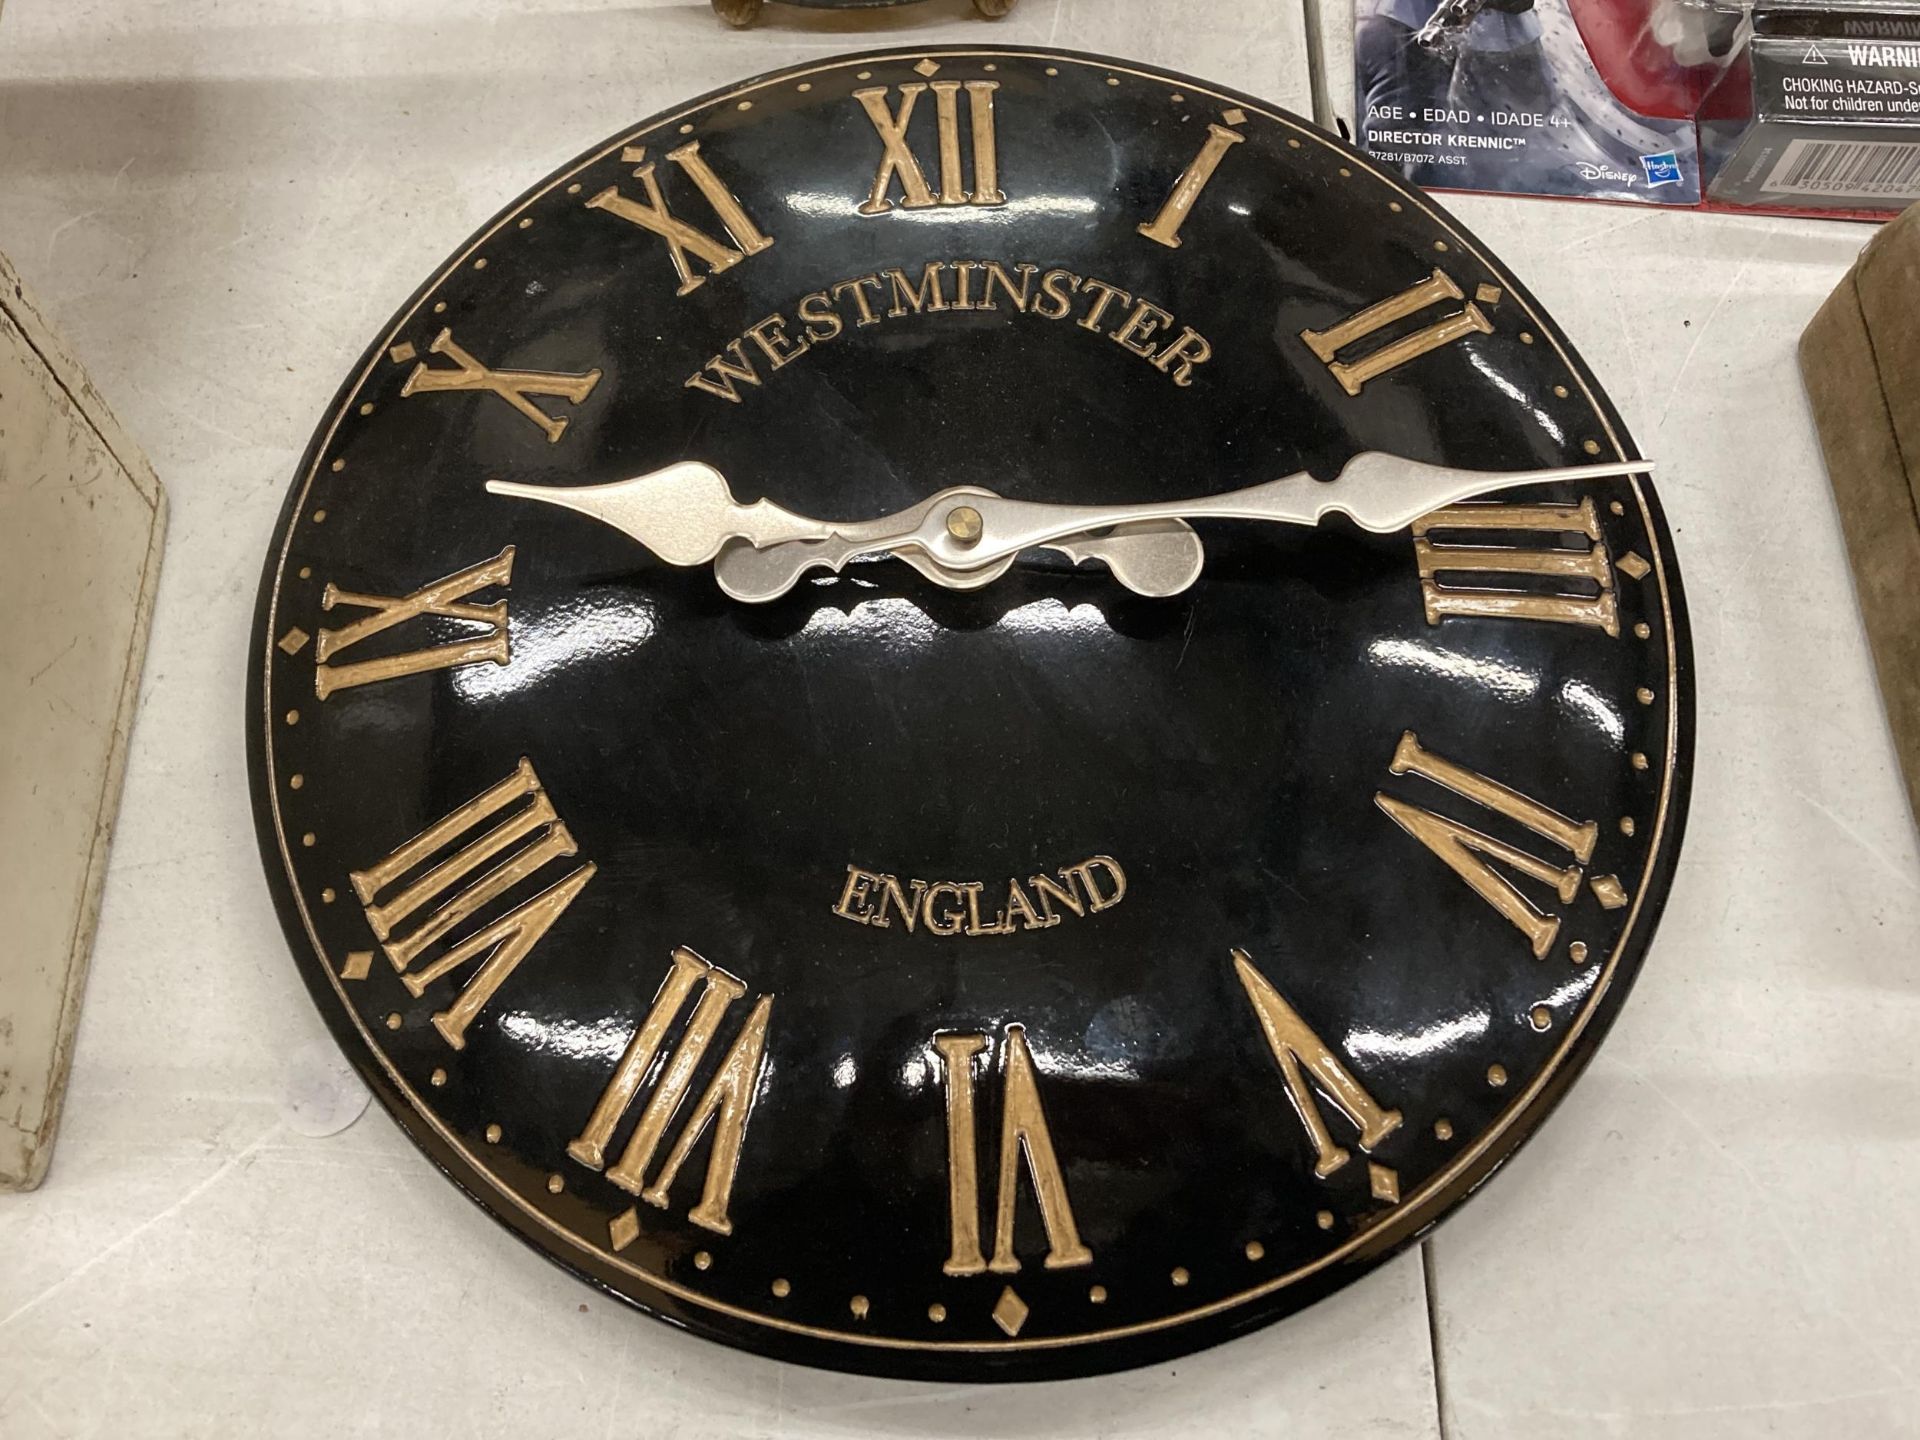 A VINTAGE STYLE 'WESTMINSTER' WALL CLOCK WITH BATTERY OPERATED MOVEMENT, DIAMETER 29CM